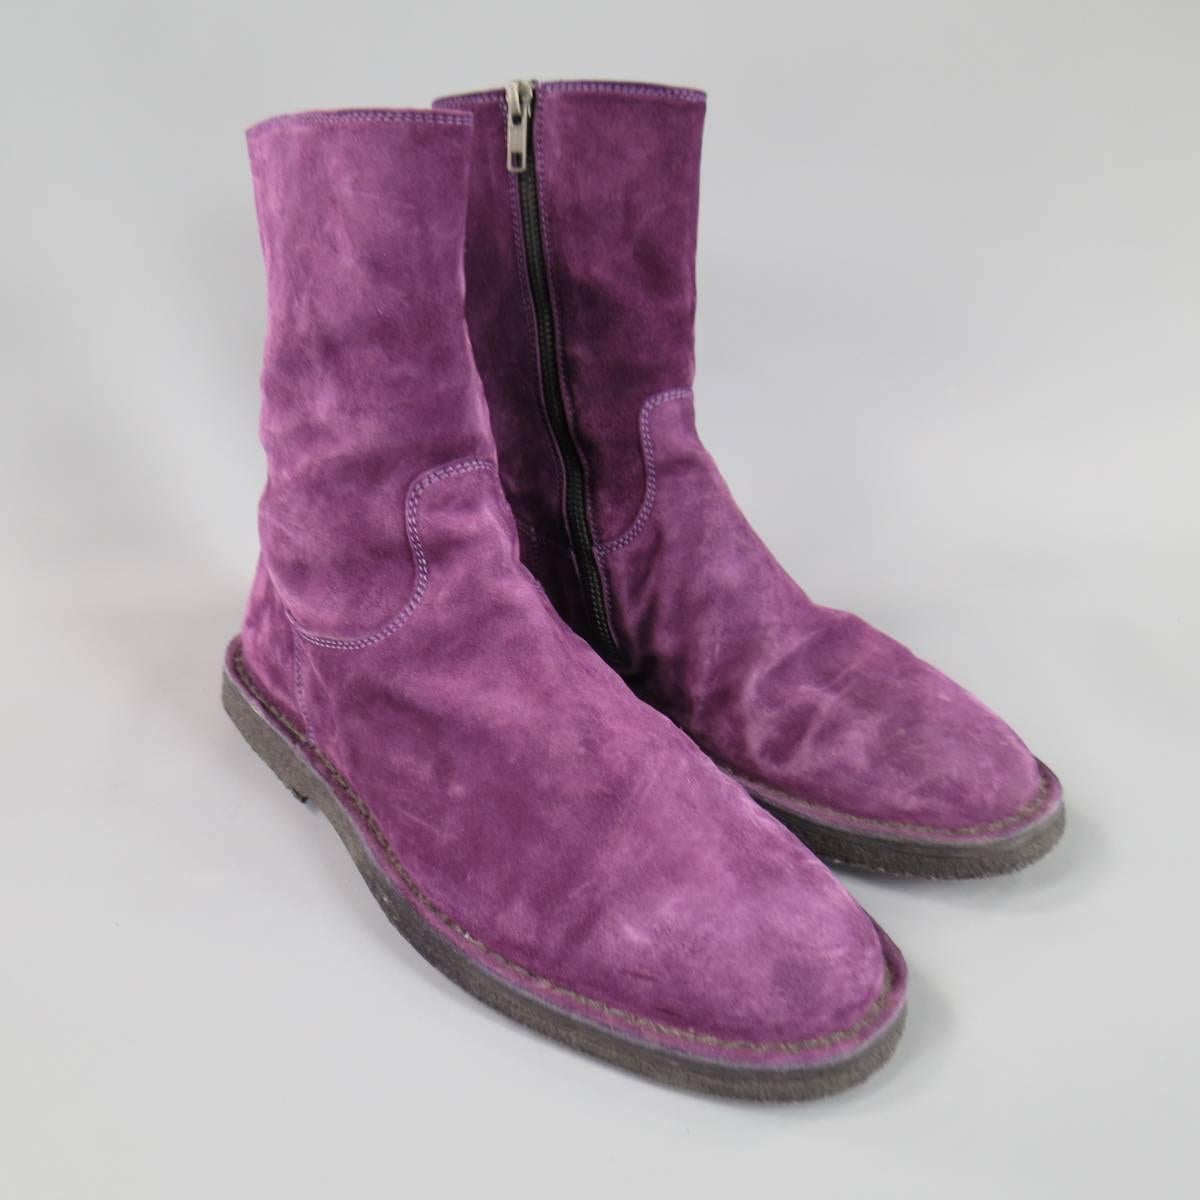 ANN DEMEULEMEESTER Boots consists of suede material in a purple color tone. Designed in a round-toe front, high ankle collar, tone-on-tone stitching along vamp and collar. Detailed with a side-zipper opening and leather lining. Crepe sole.
 
Good